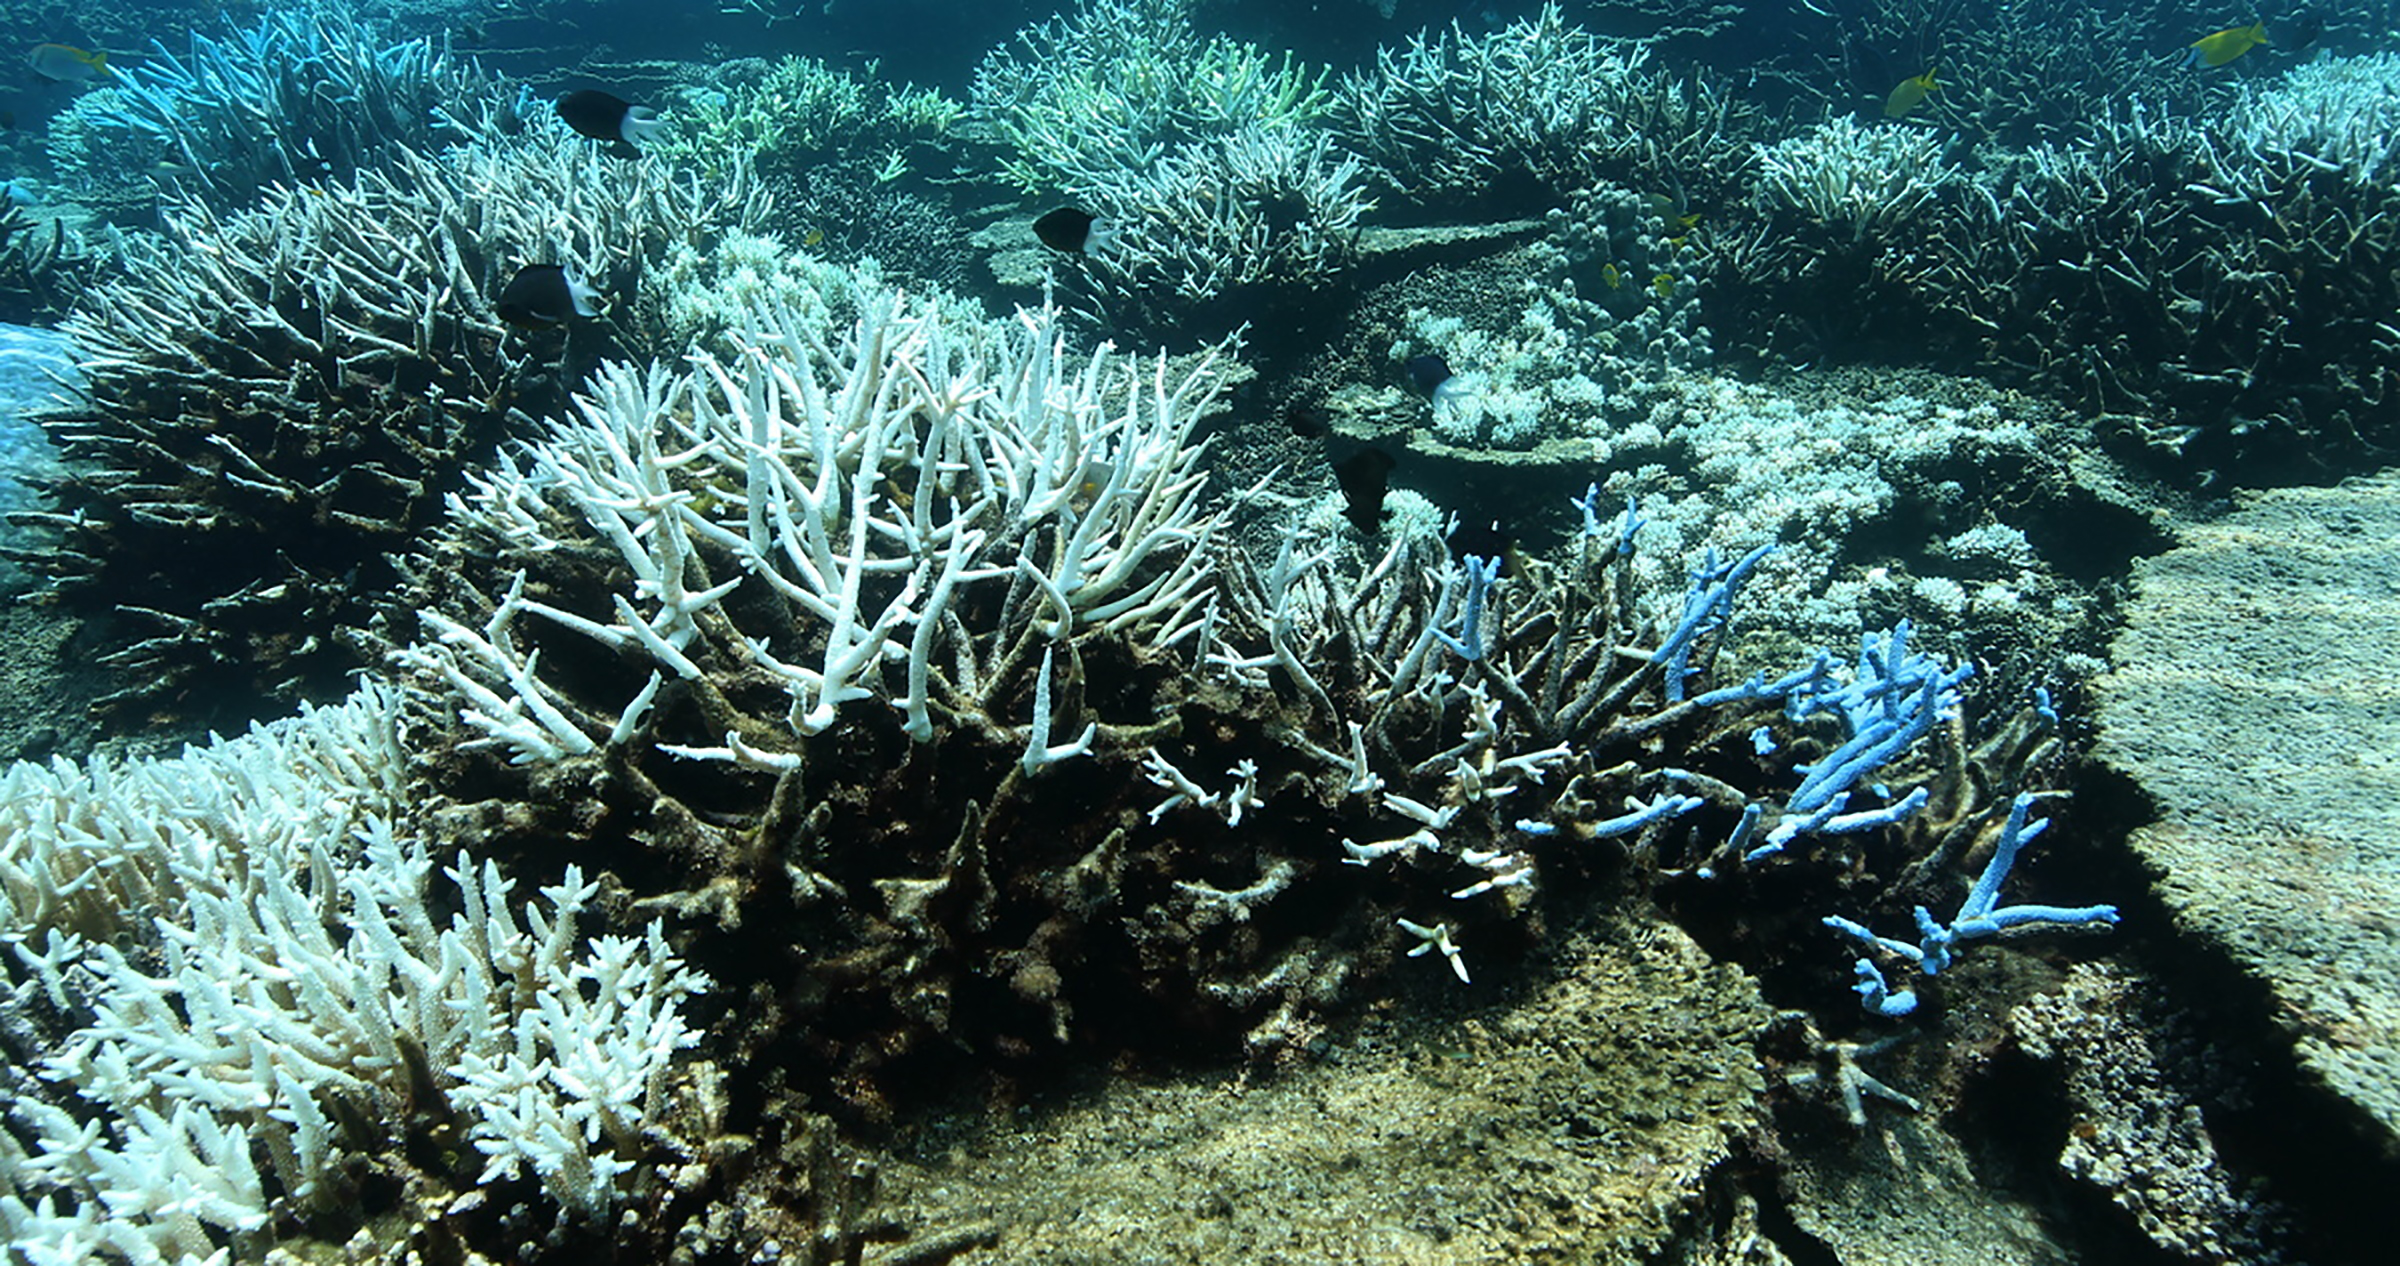 The Great Barrier Reef in Australia experienced its second major bleaching event in 2 years in March 2017. (Dean Miller—Greenpeace)